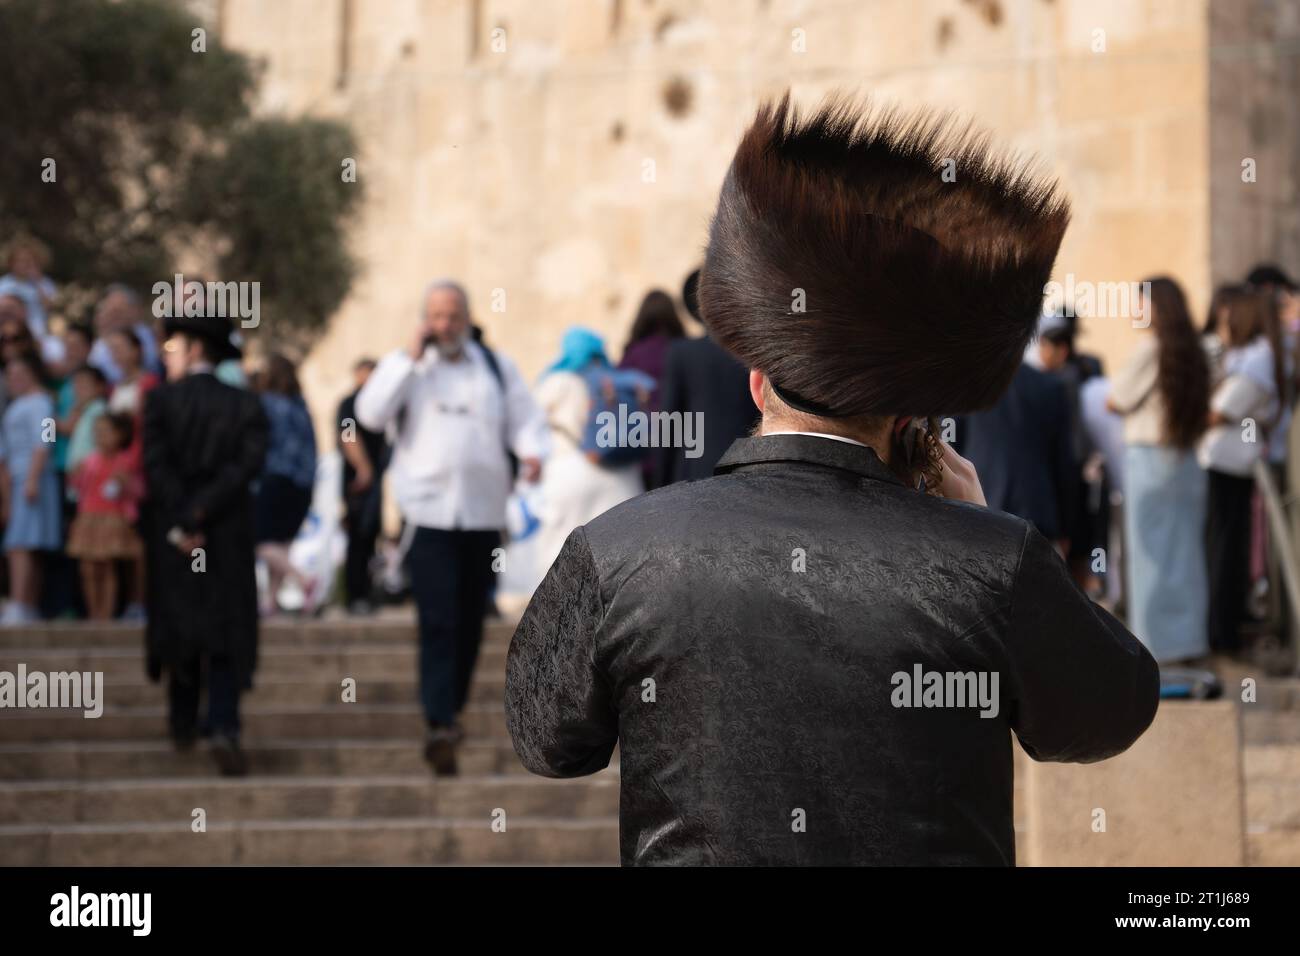 Back view of an Orthodox Jewish man Hasidim with a large fur hat and in a black suit Stock Photo